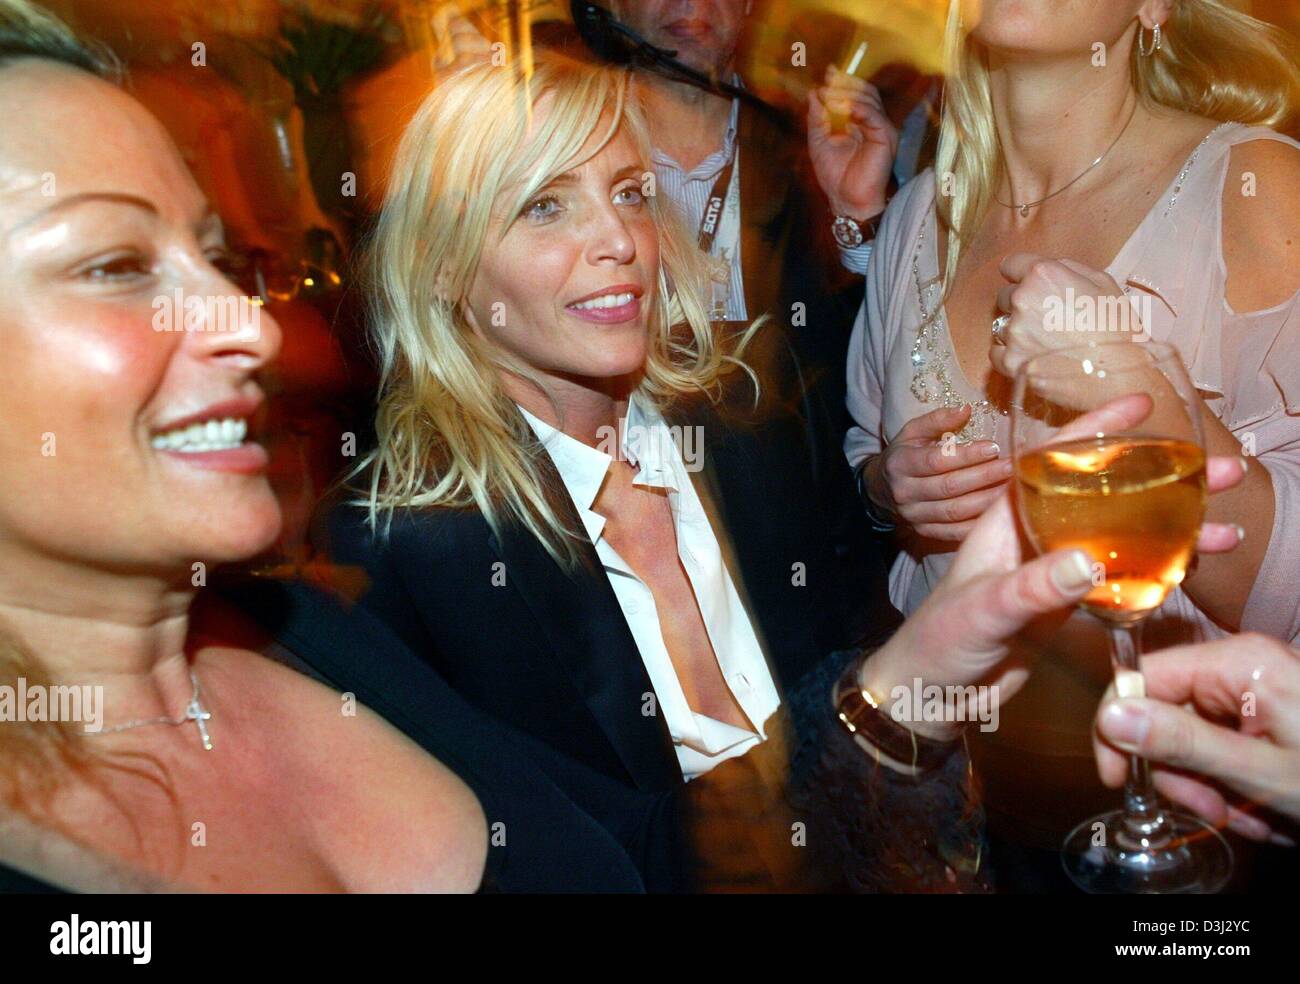 (dpa) - German model Nadja Auermann (L) cheers with a glass of wine as she attends the 'Peoples Night 2004' celebrity party in Berlin, 7 February 2004. The party took place in the conext of the 54th Berlinale Film Festival and was attended by numerous celebrities from culture, economy and politics. Stock Photo